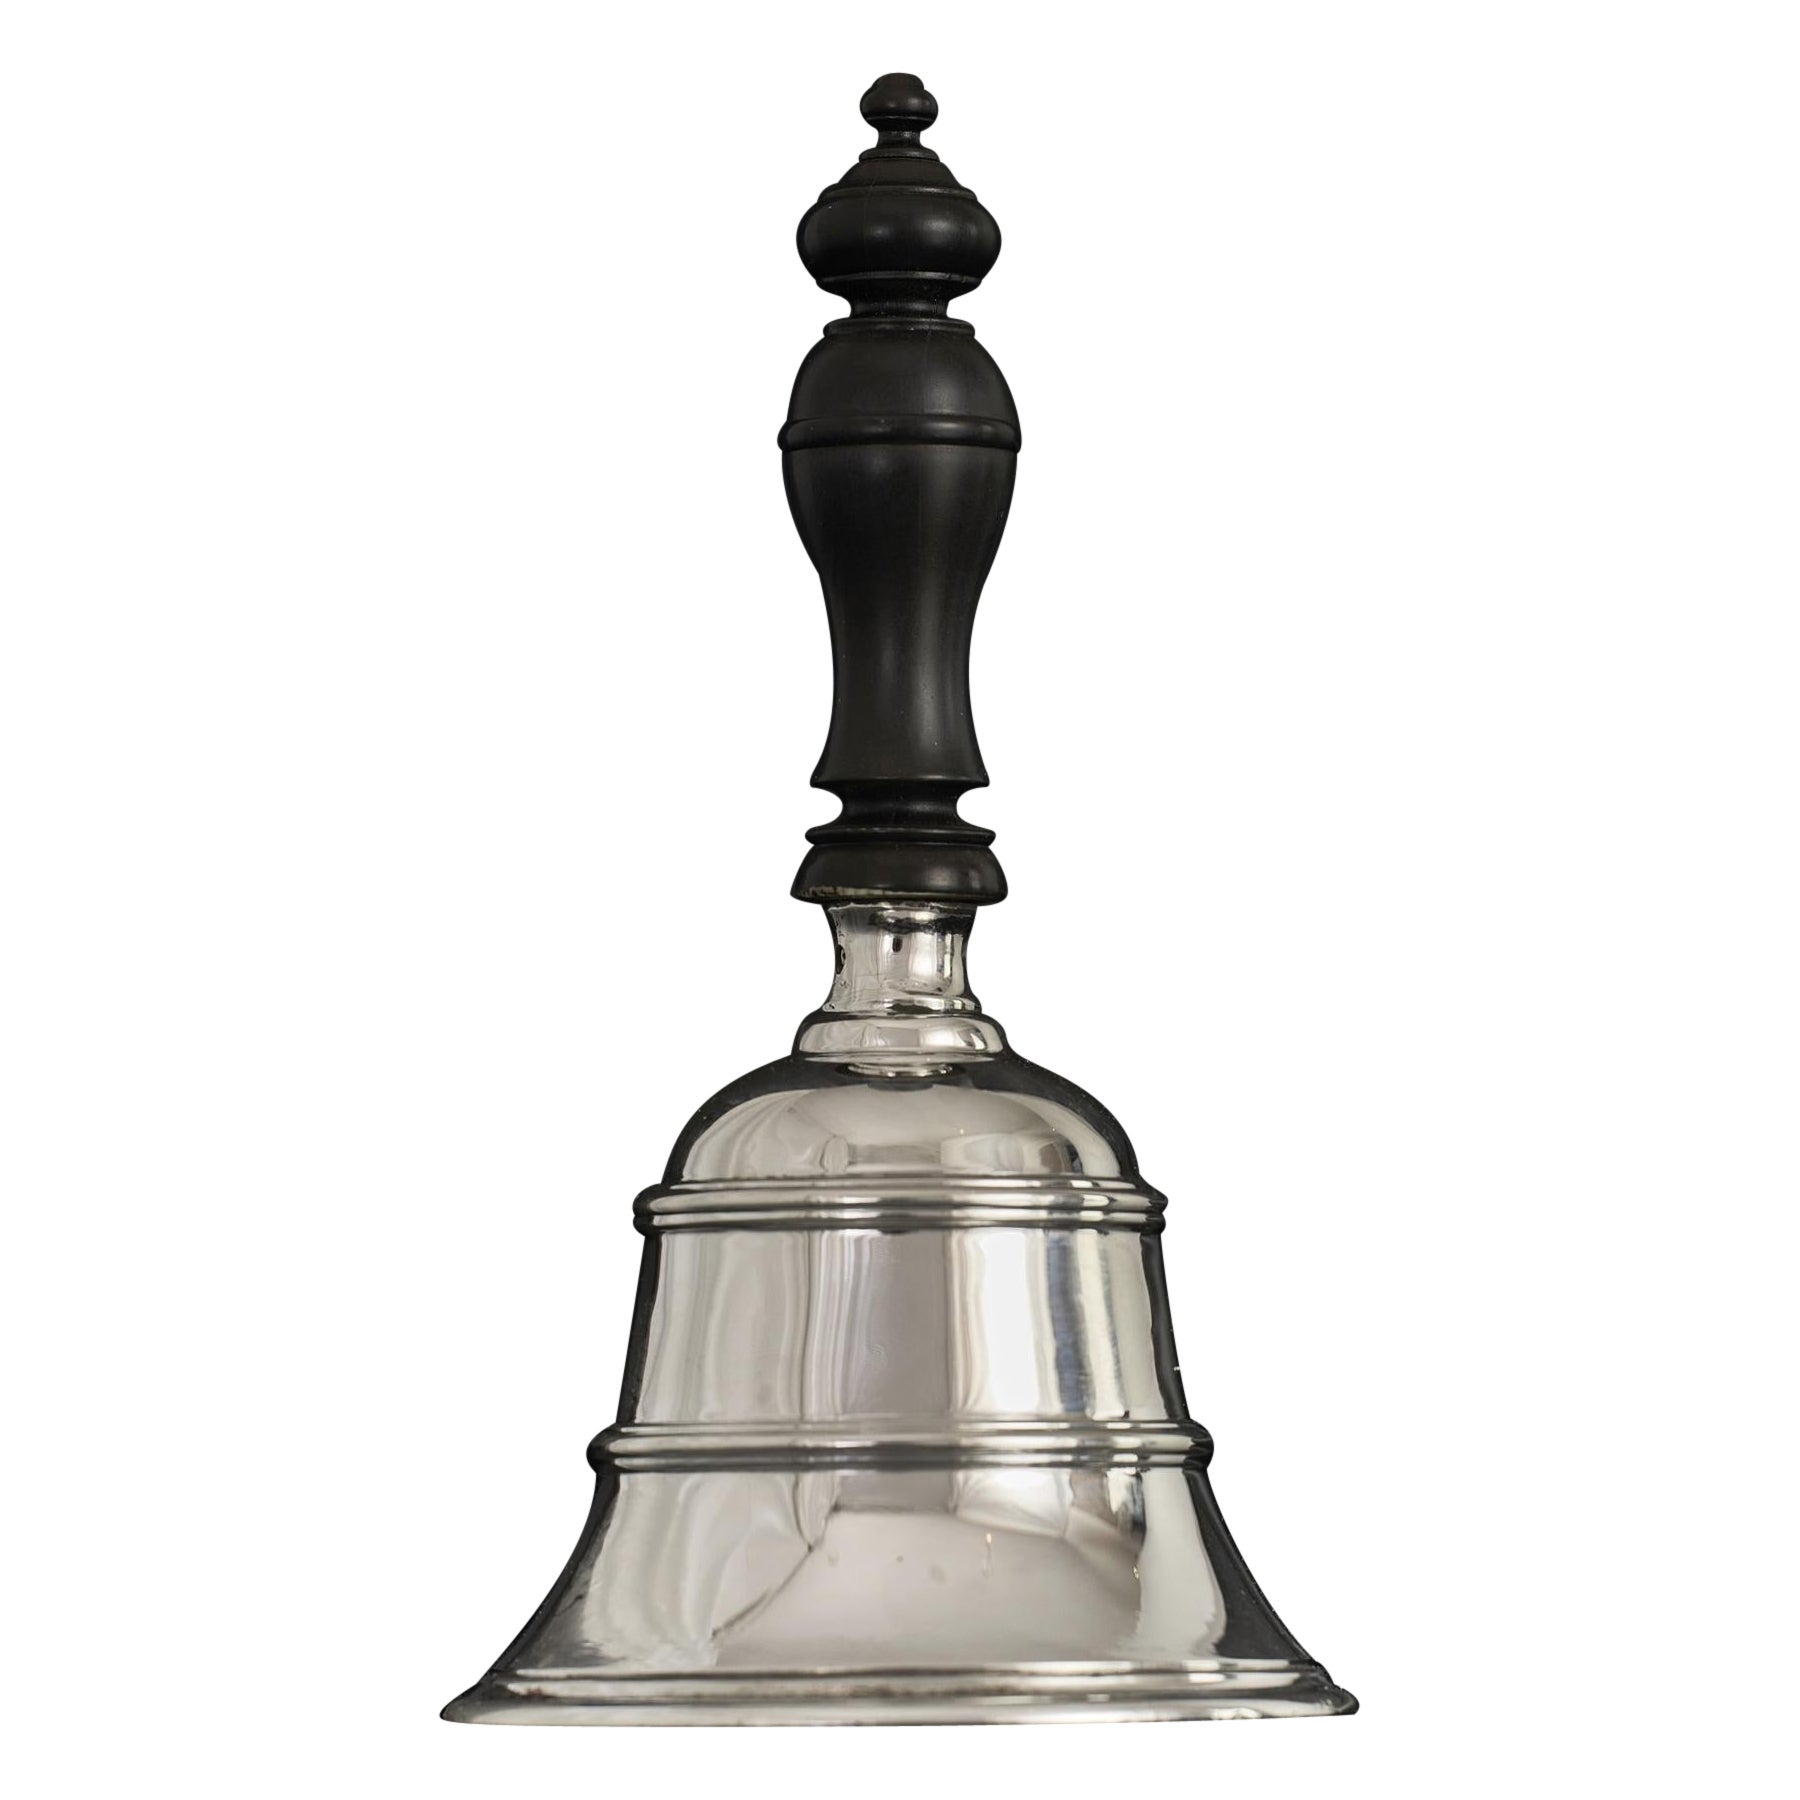 Silver table bell with hardwood handle For Sale